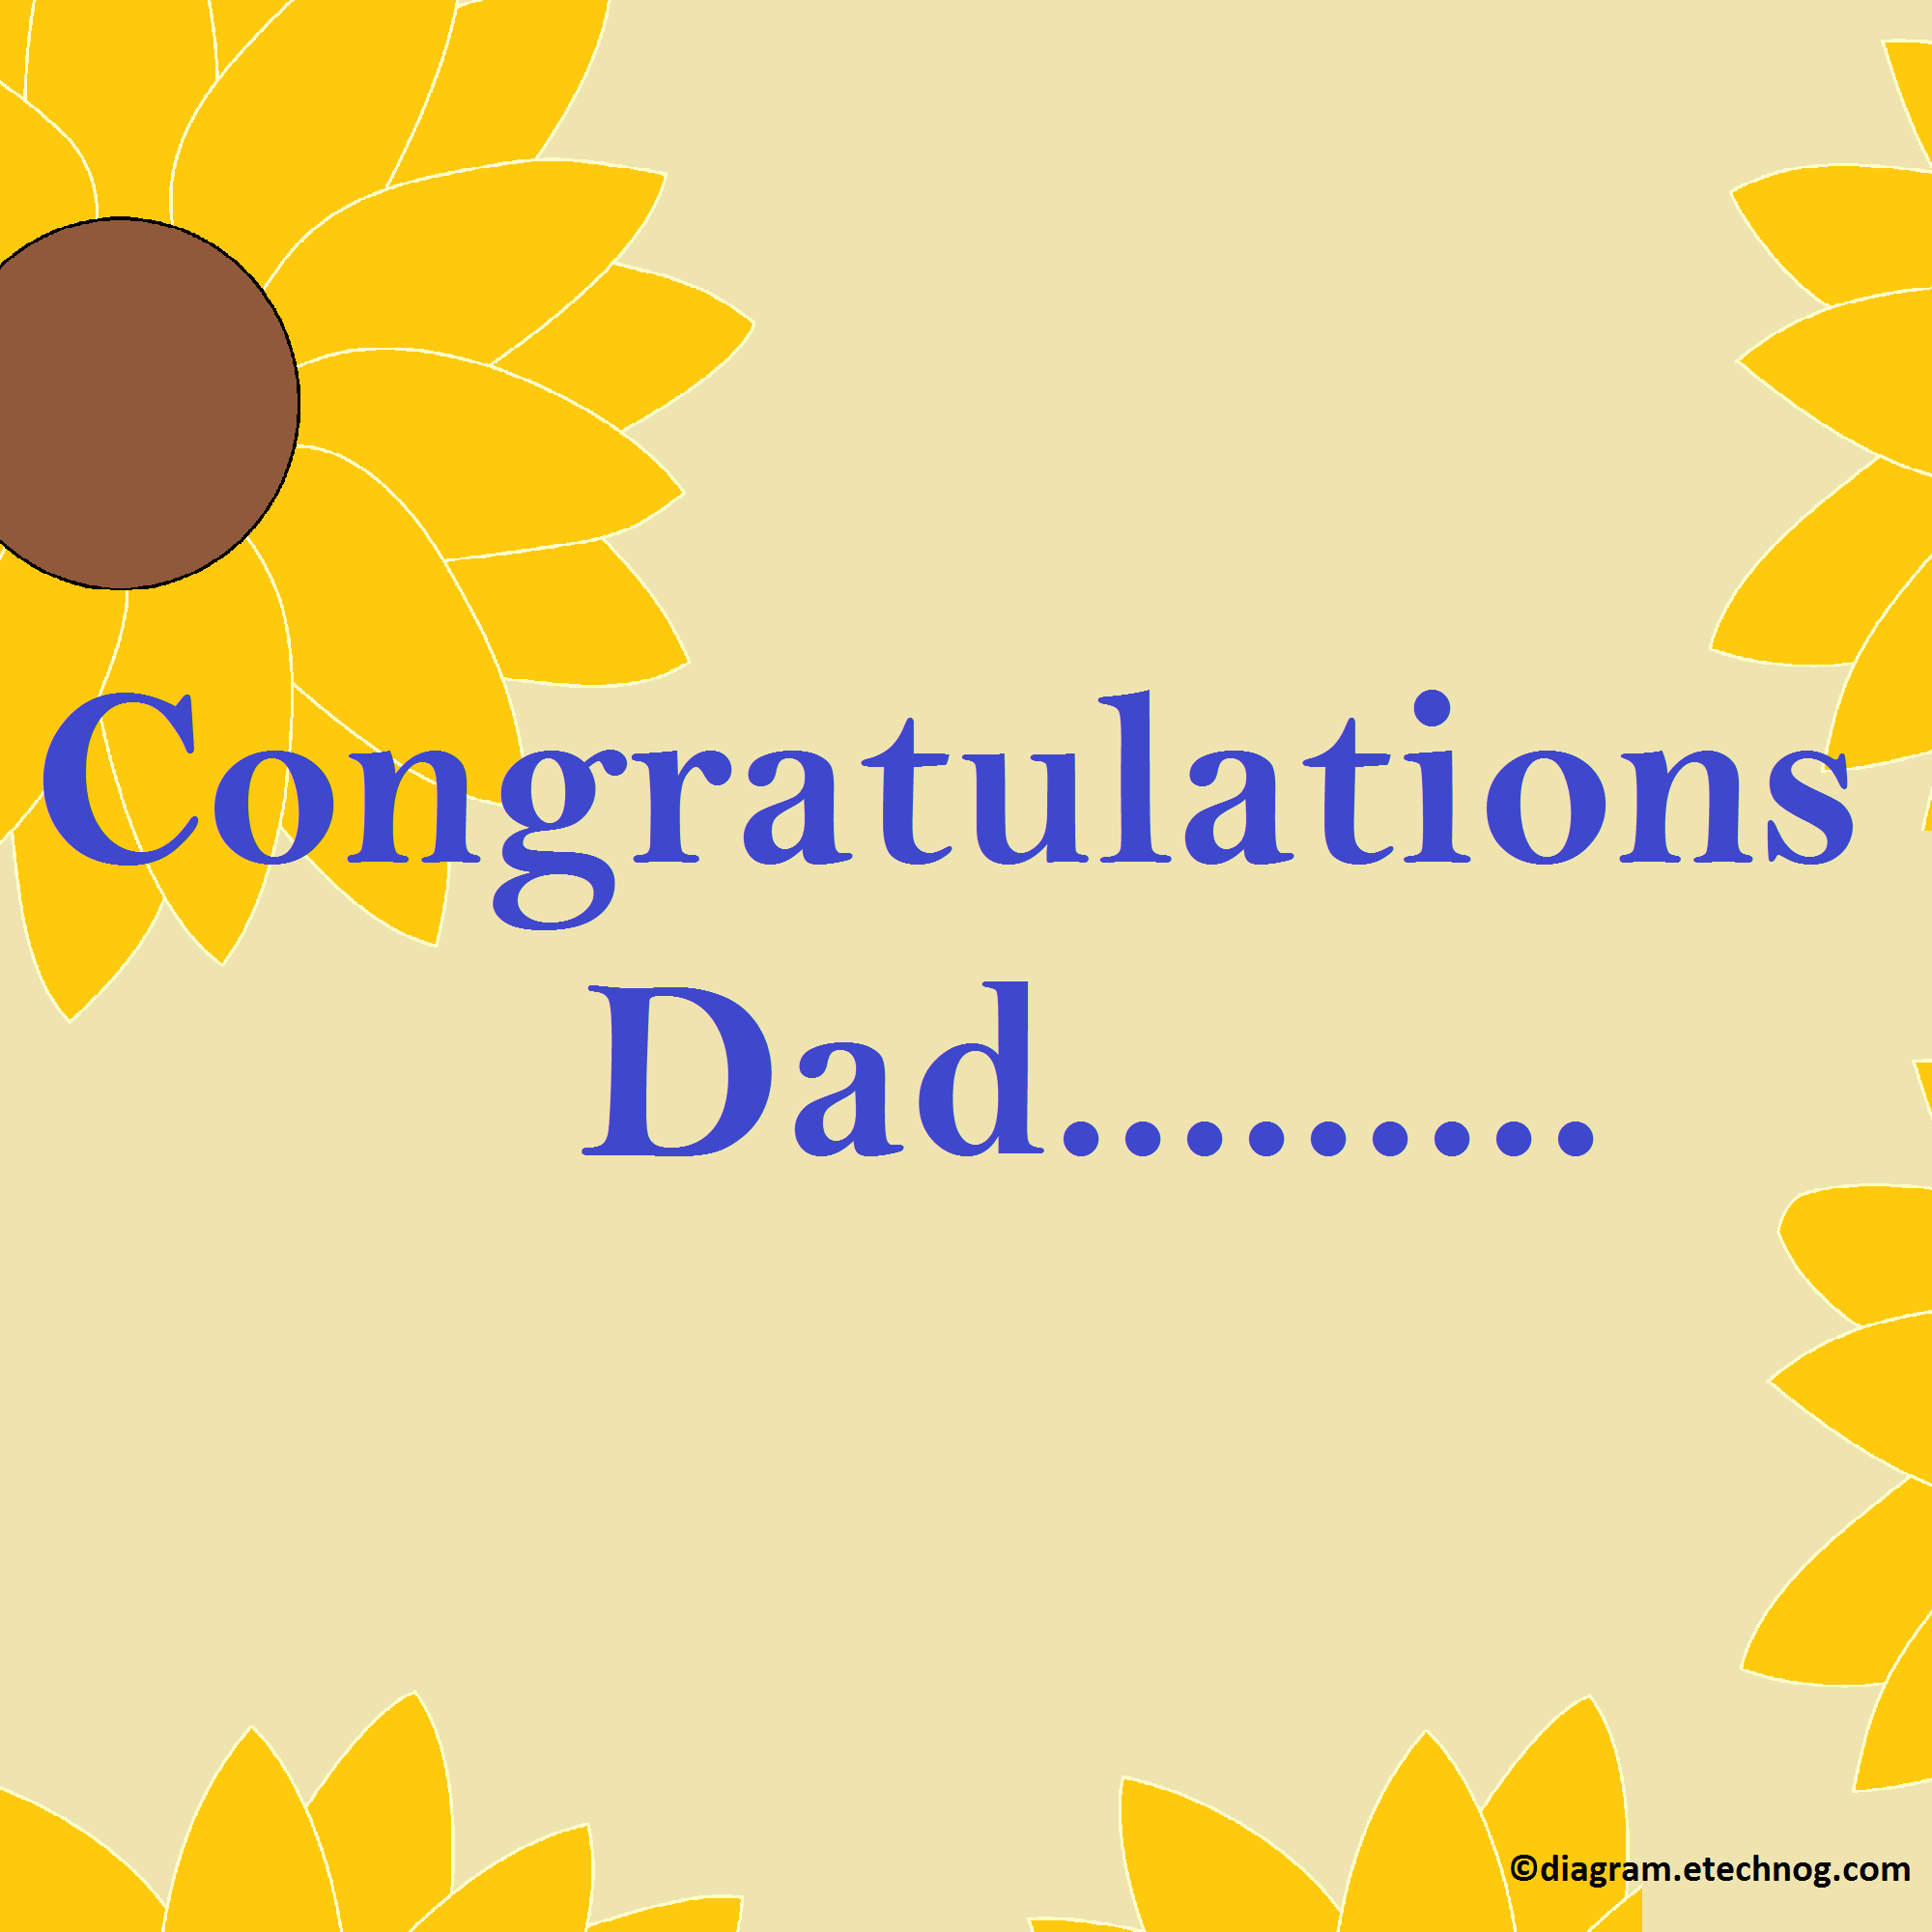 Congratulations Image for Father or Dad